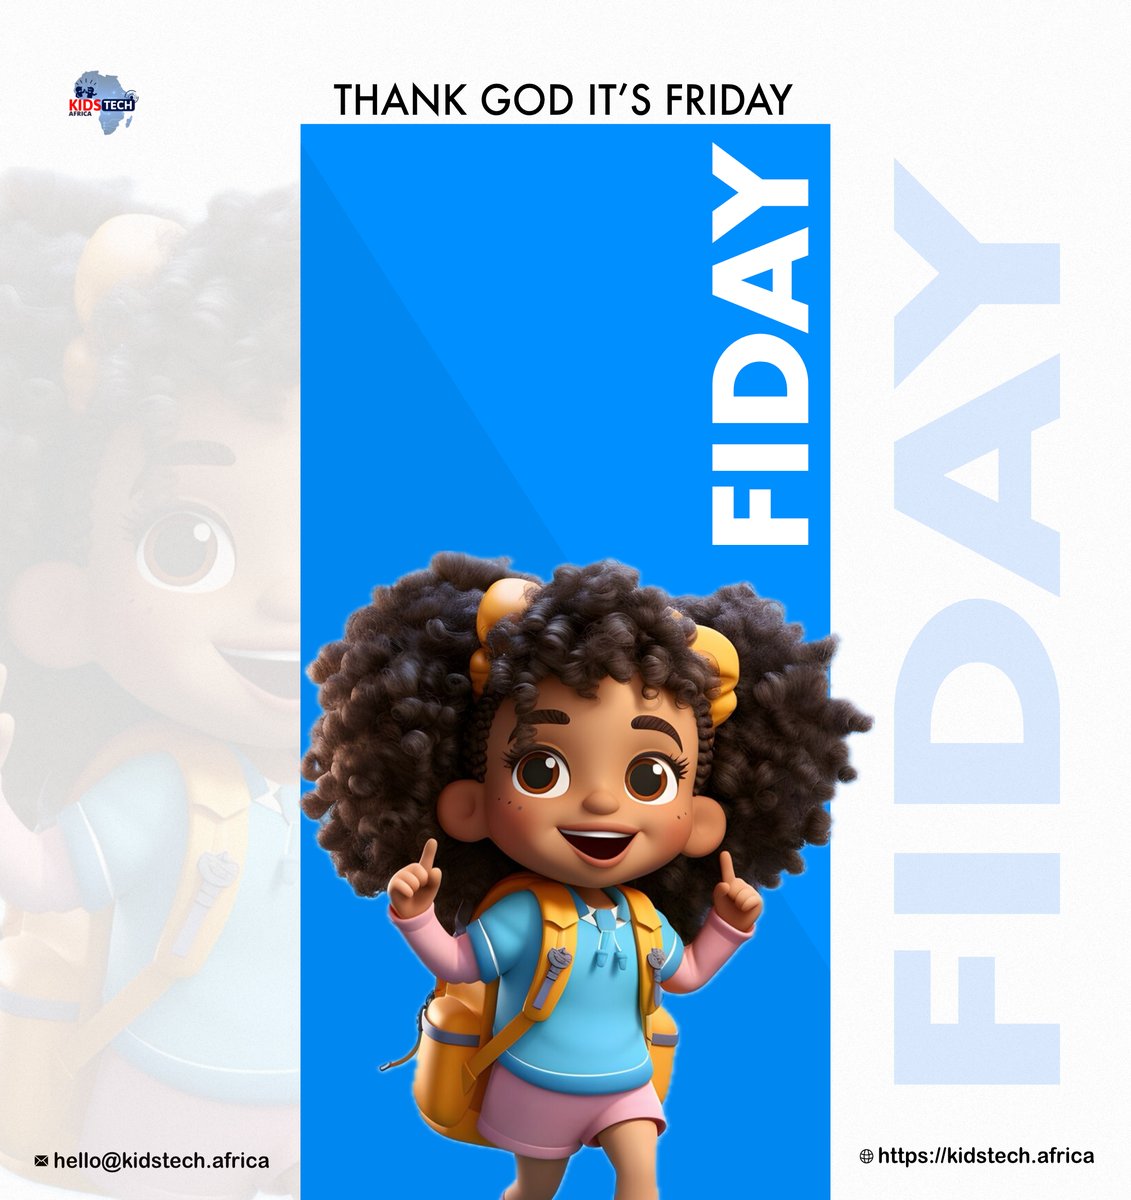 TGIF! Let's kick off the weekend with a smile and leave the stress of the week behind.
#TGIF #FridayFeeling #kidstechafrica #Java